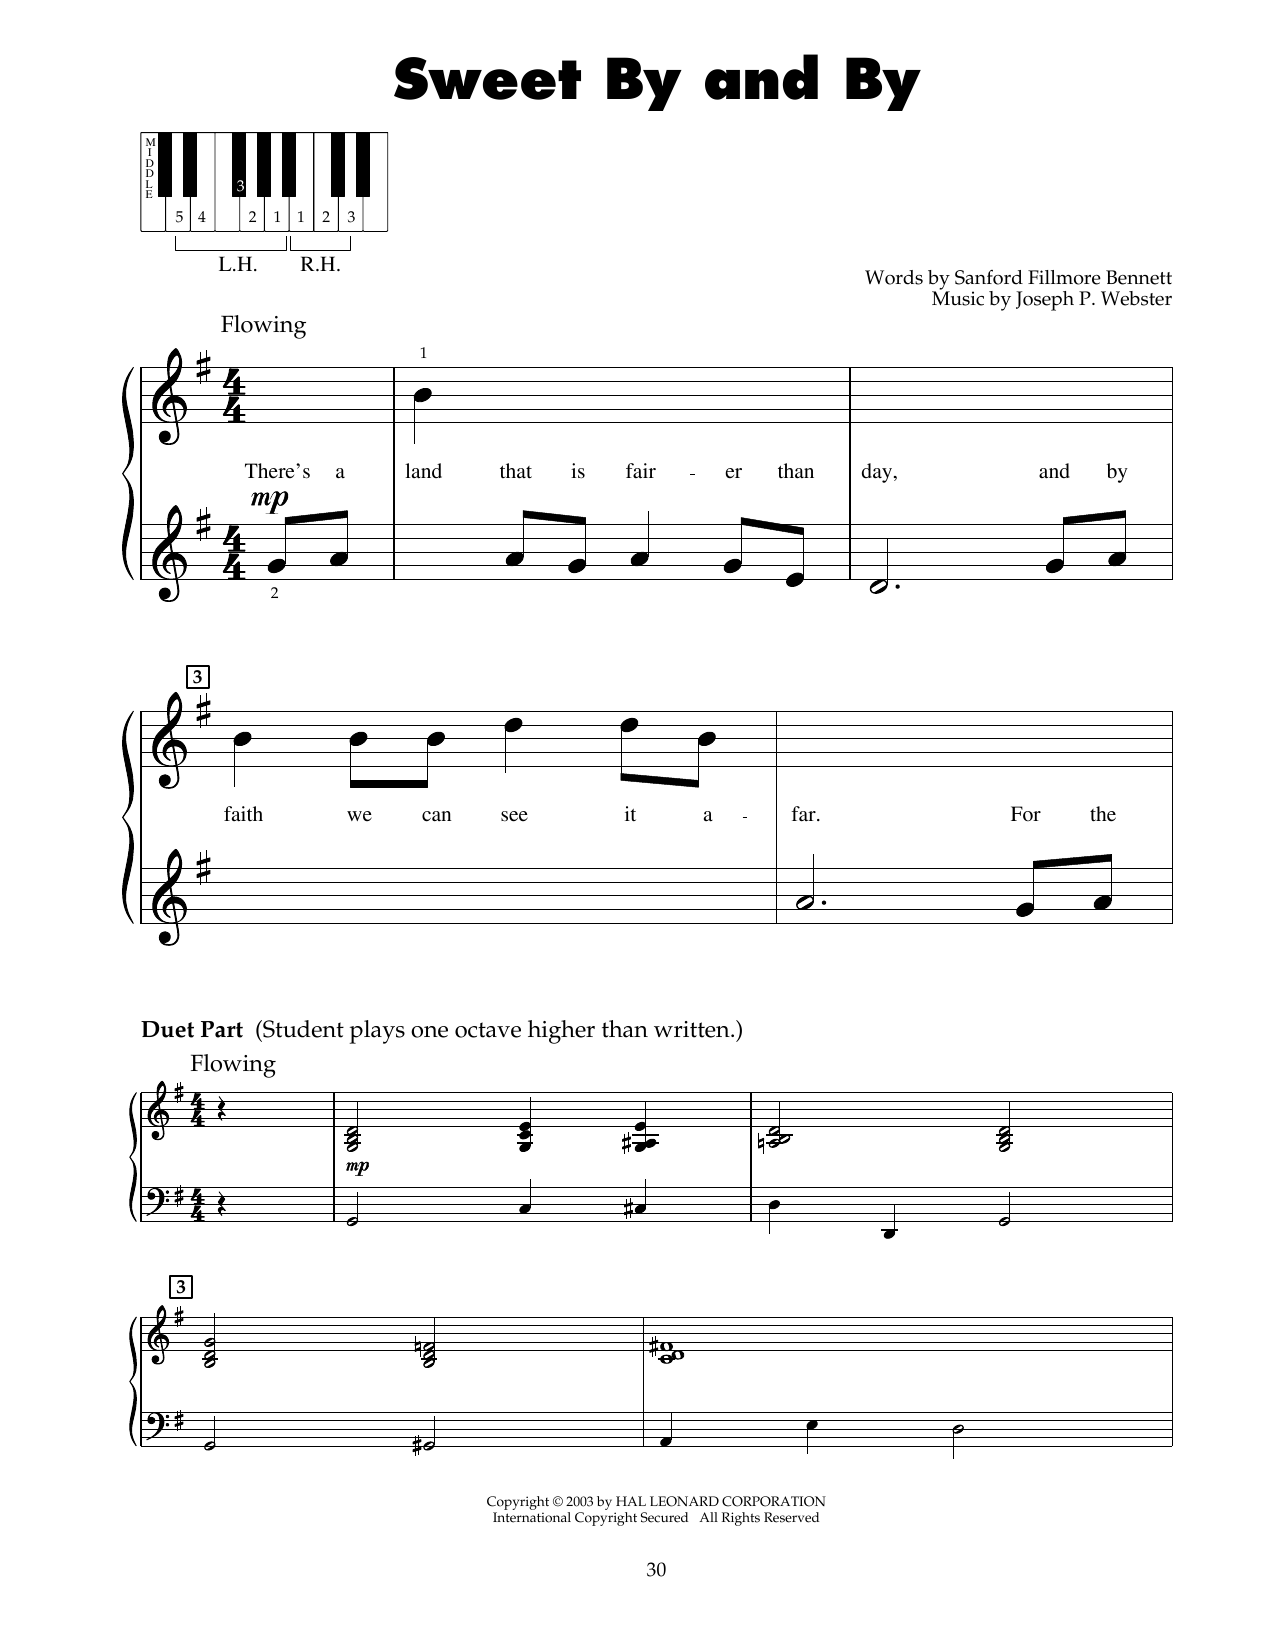 Download Sanford Fillmore Bennett Sweet By And By Sheet Music